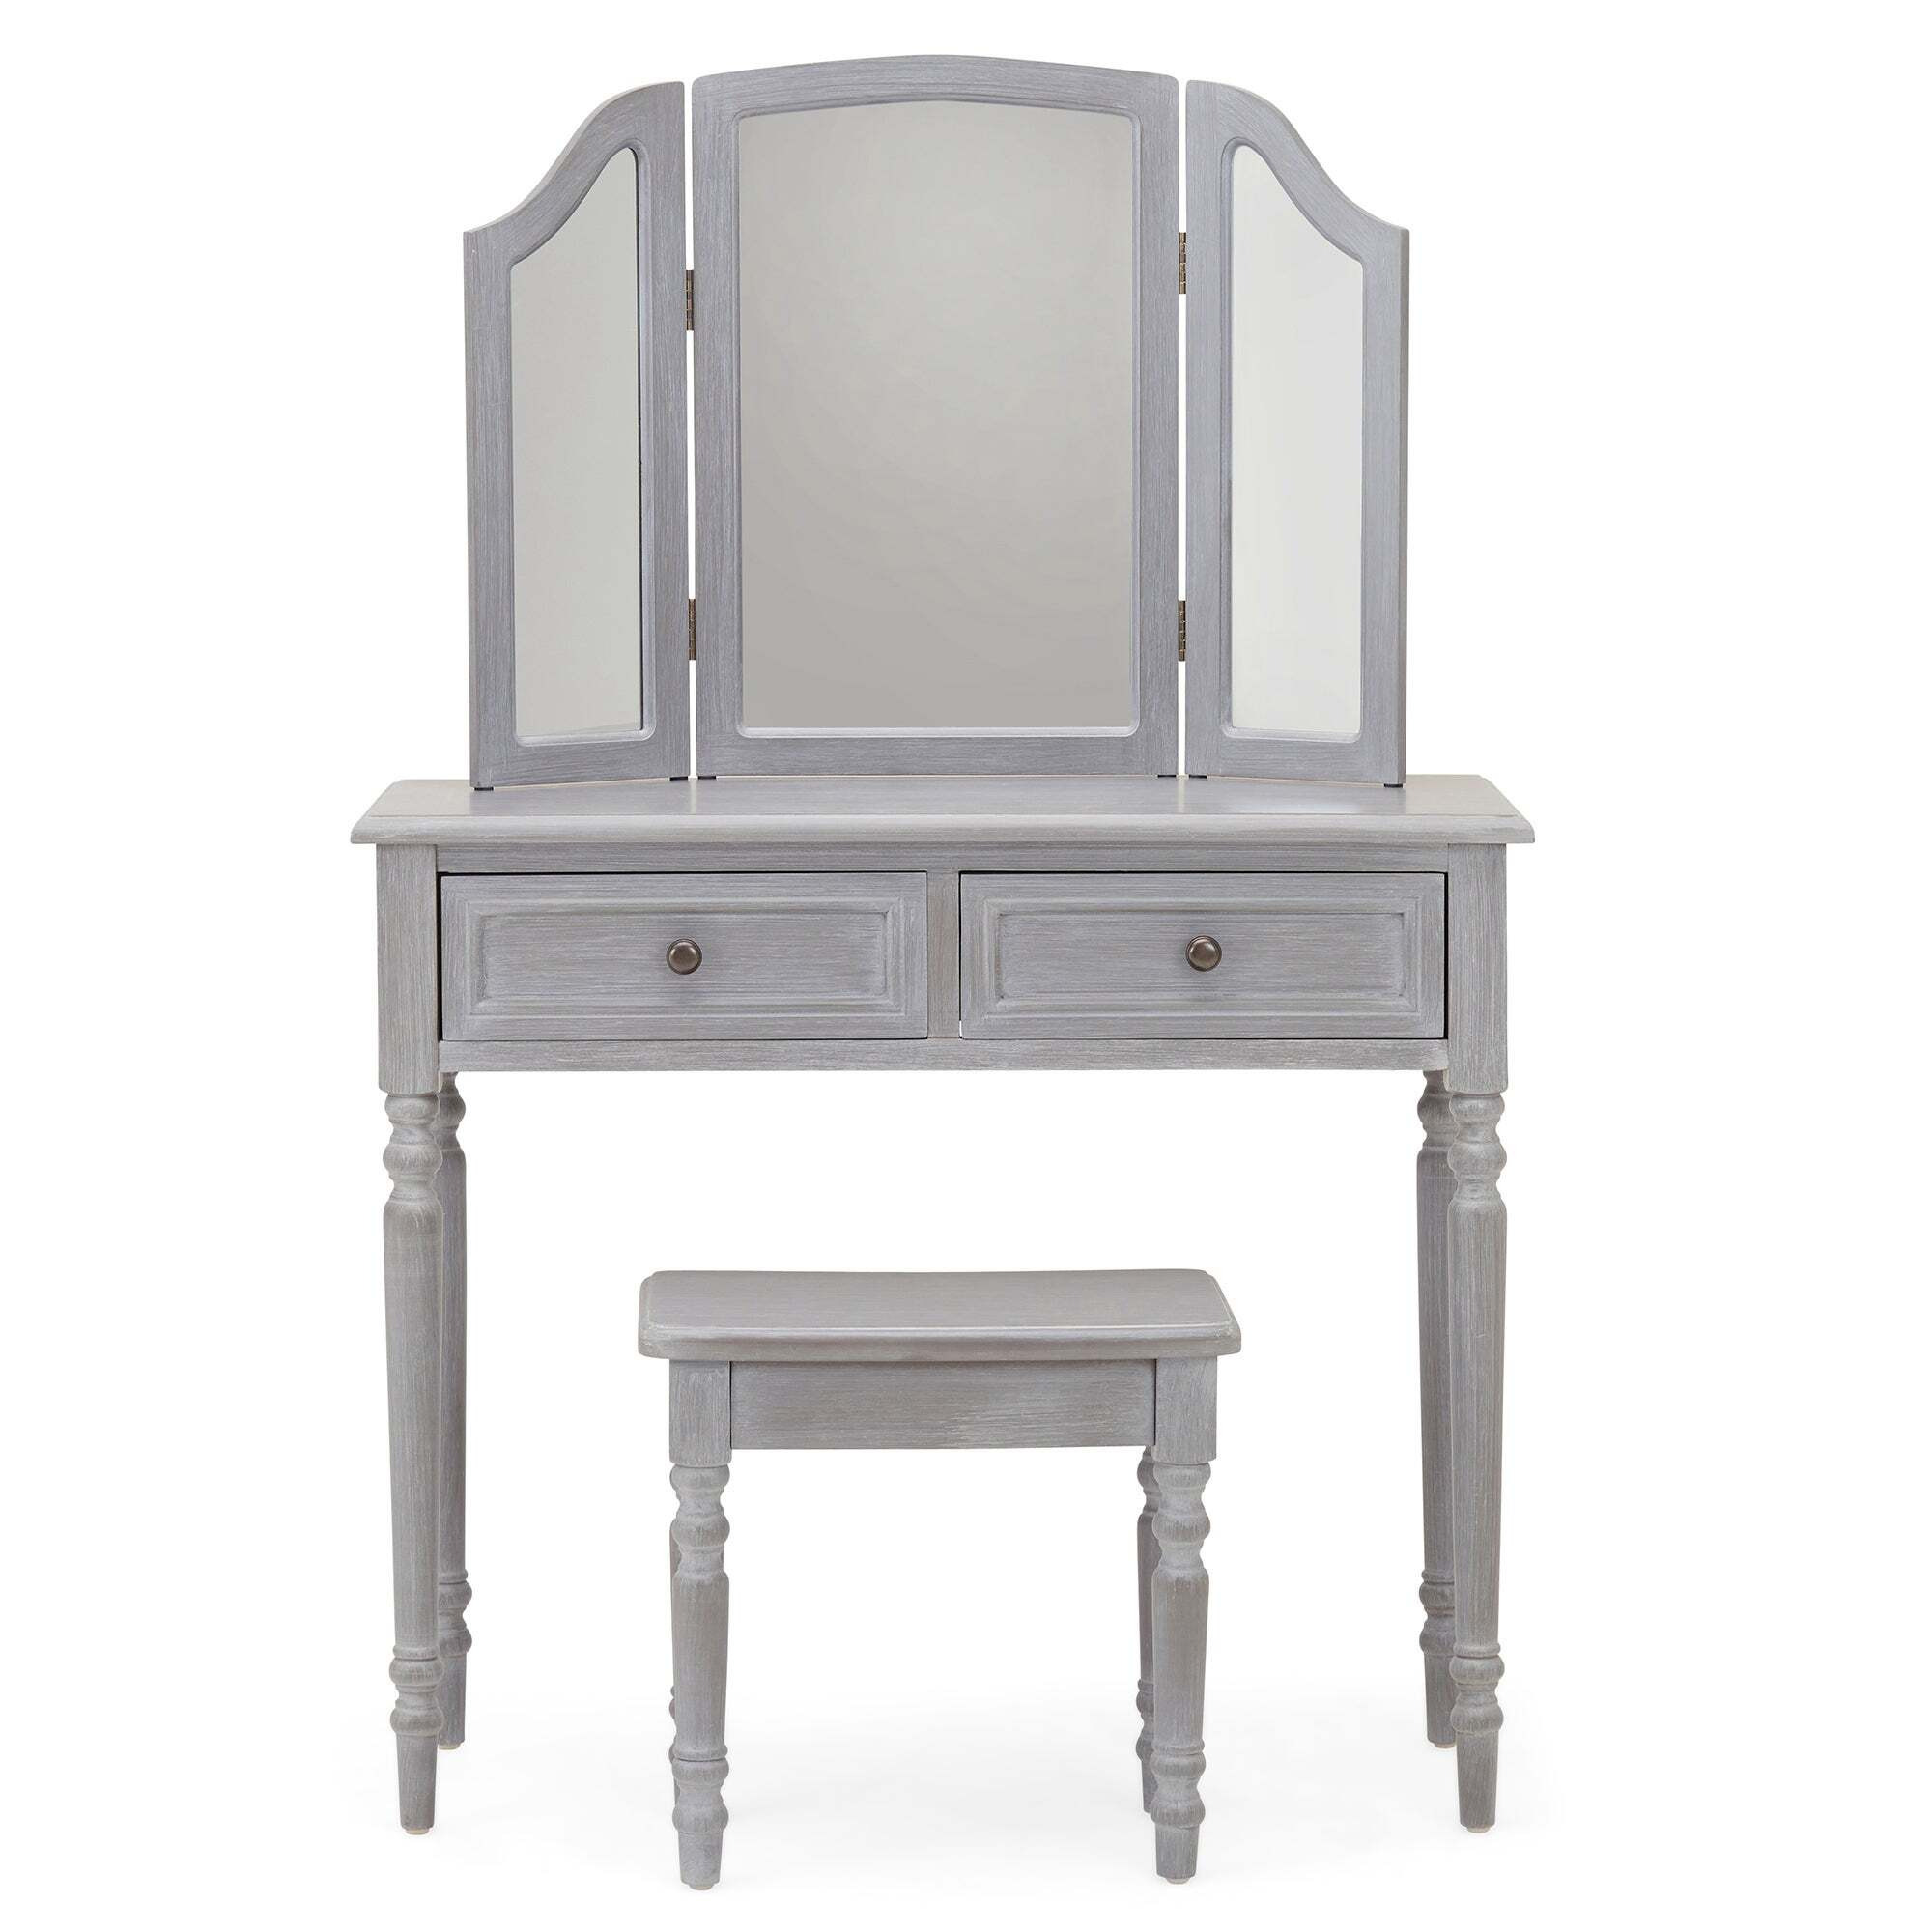 Lucy Cane 2 Drawer Dressing Table Set with Mirror Grey